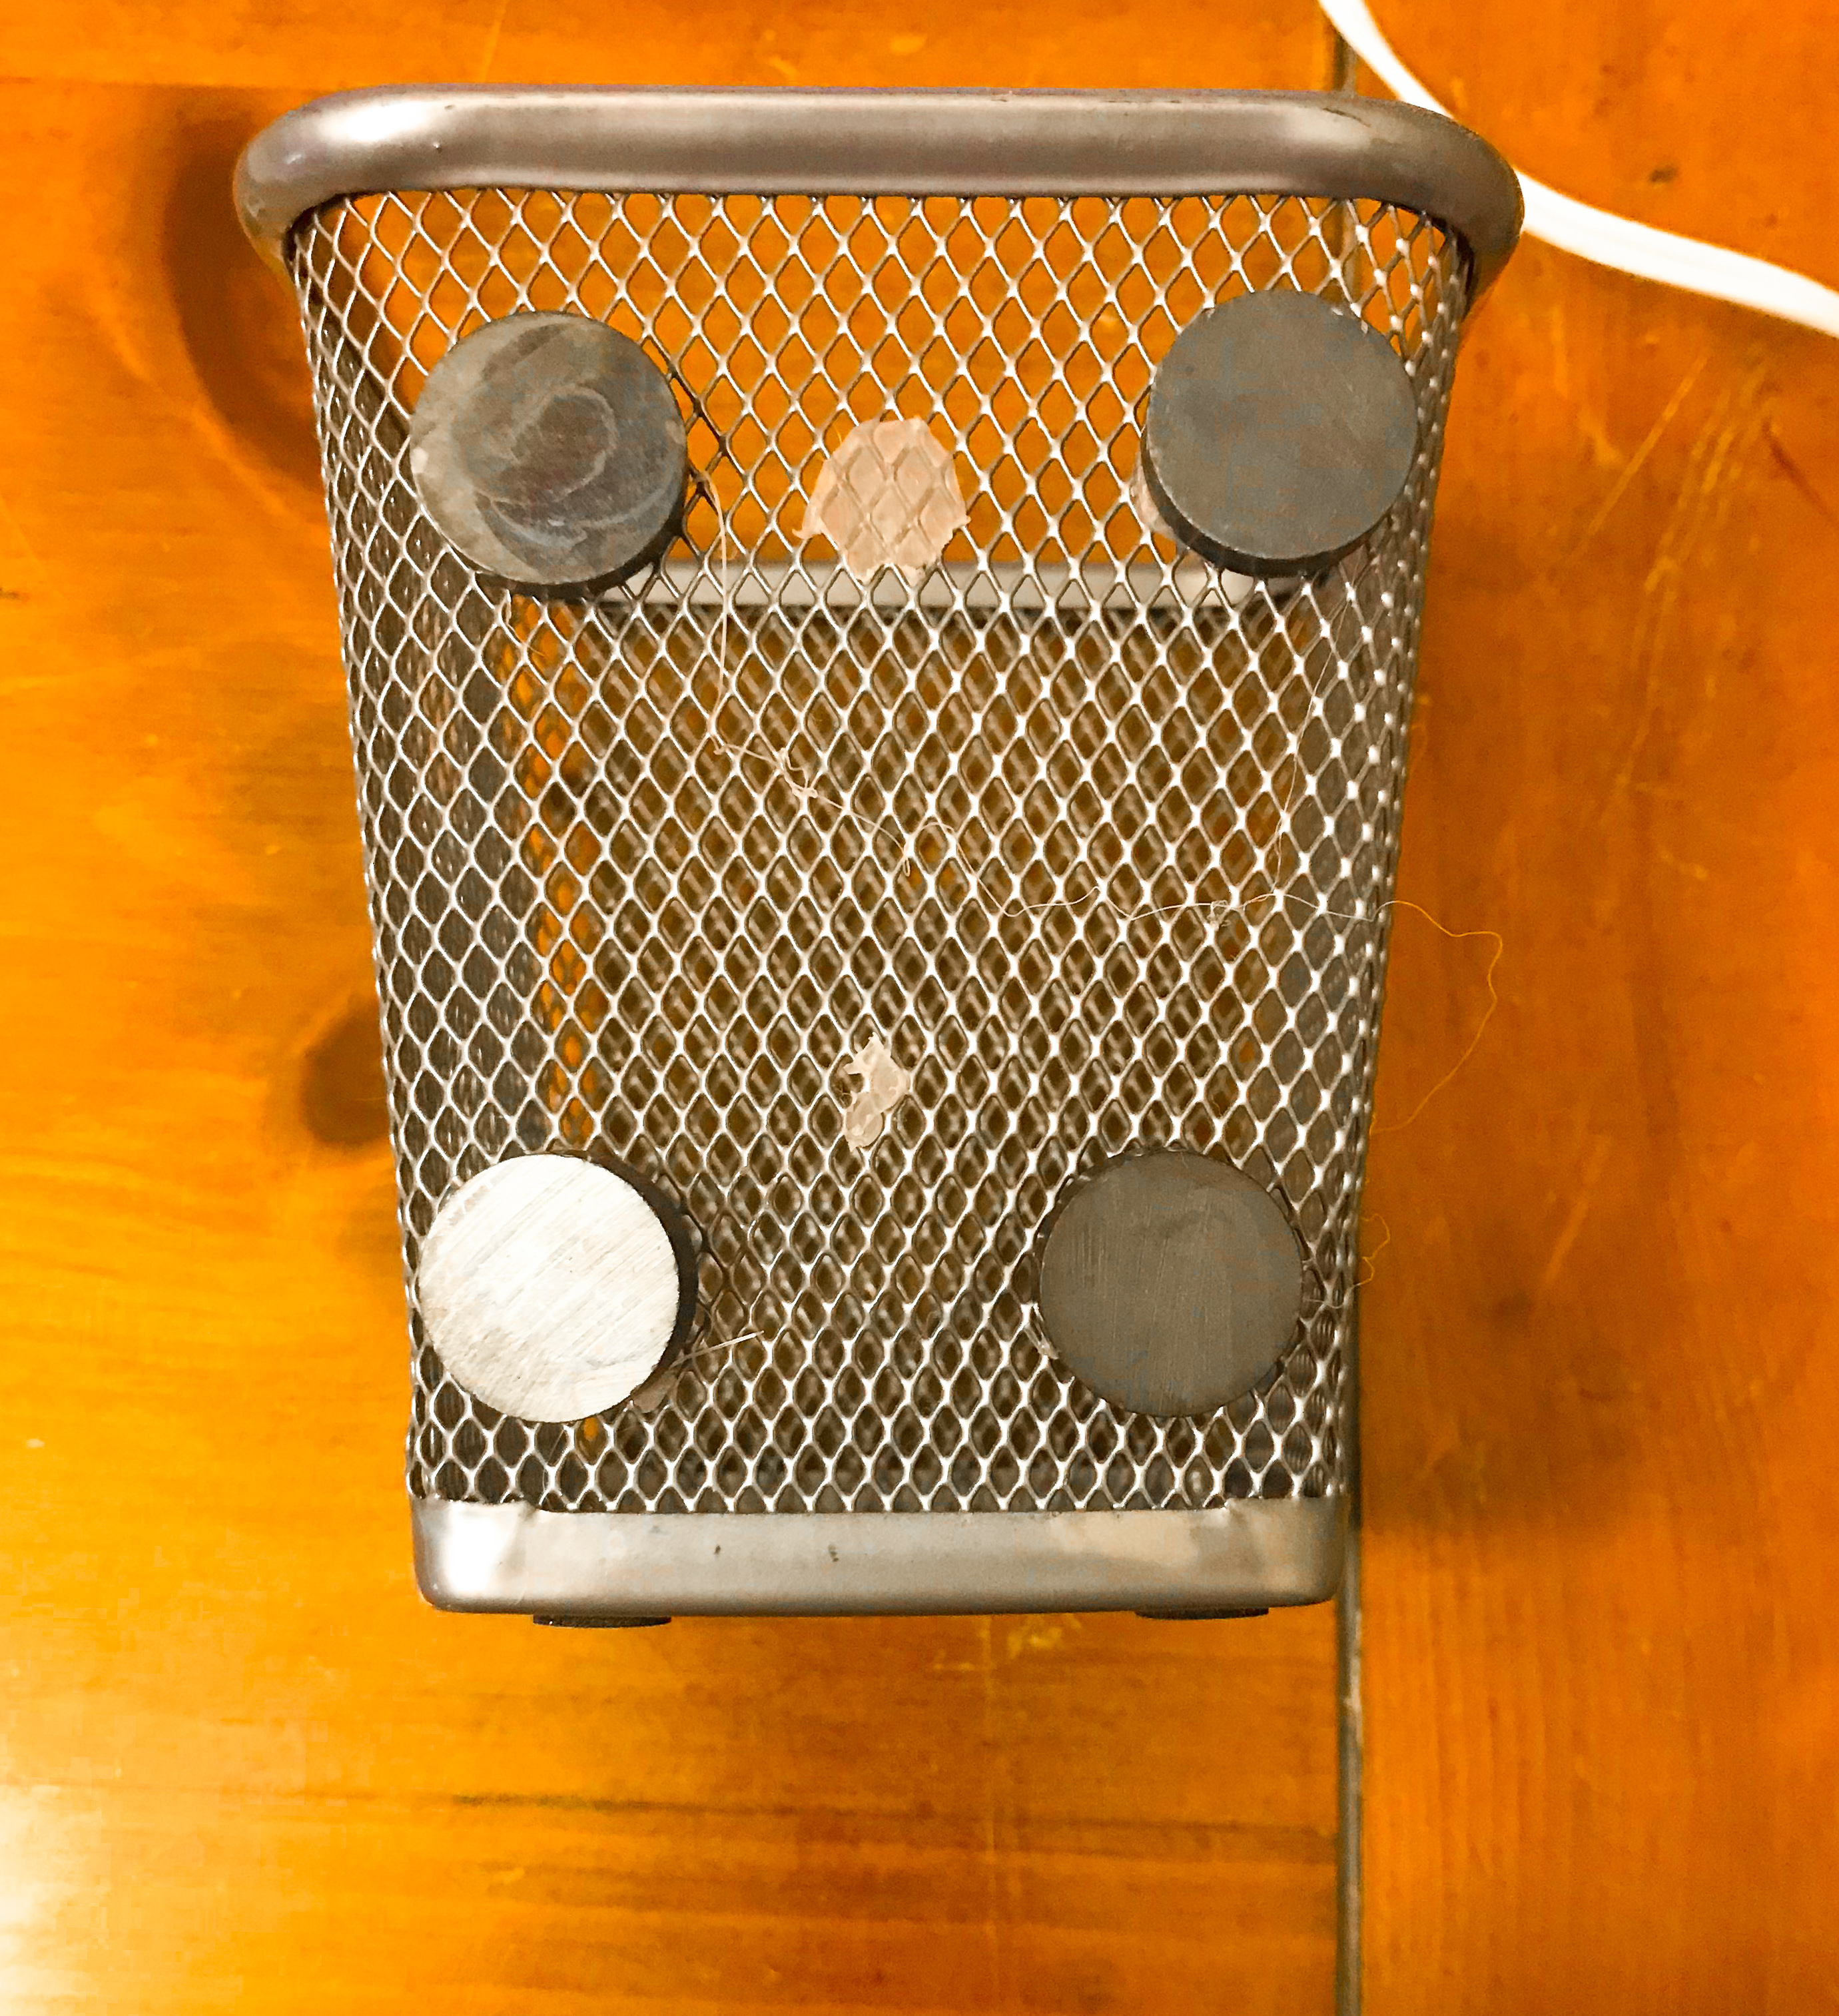 A metal pencil holder with 4 disc magnets glued to the back.